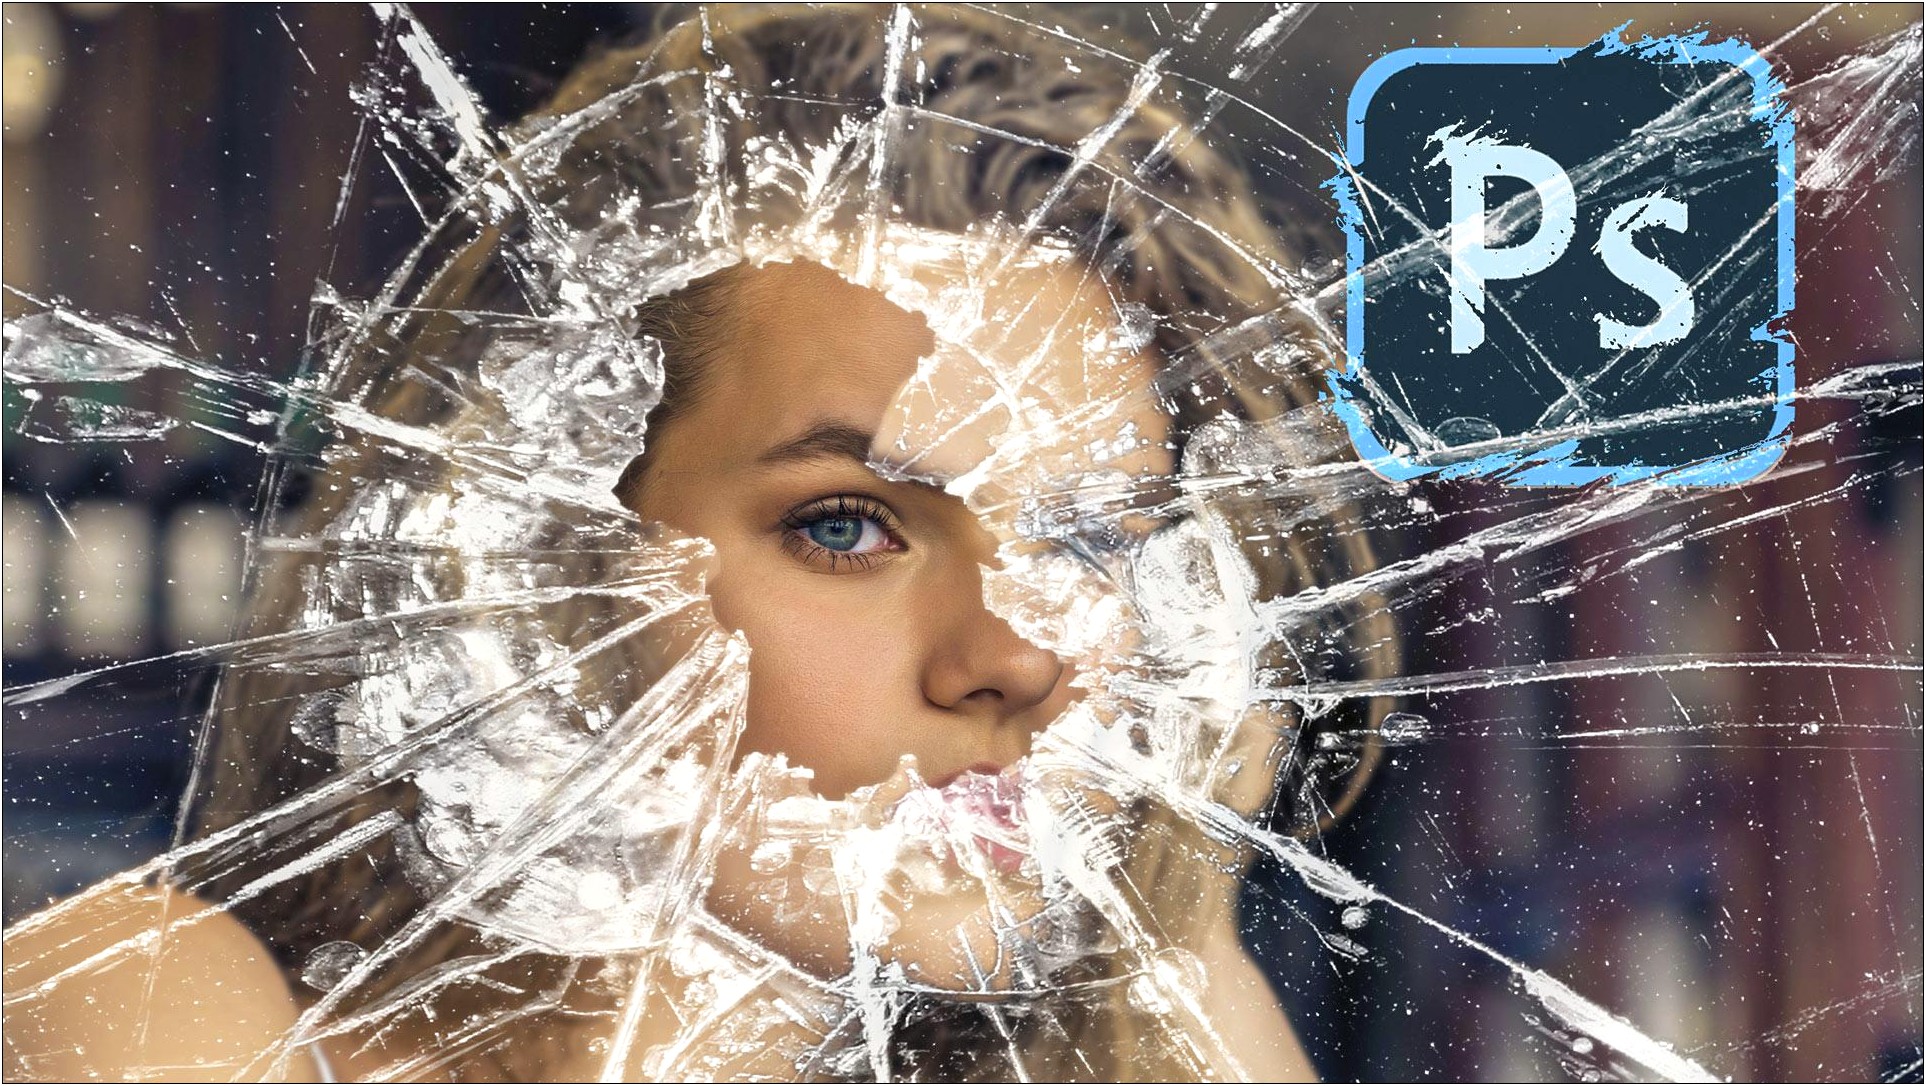 Broken Glass After Effects Template Free Download